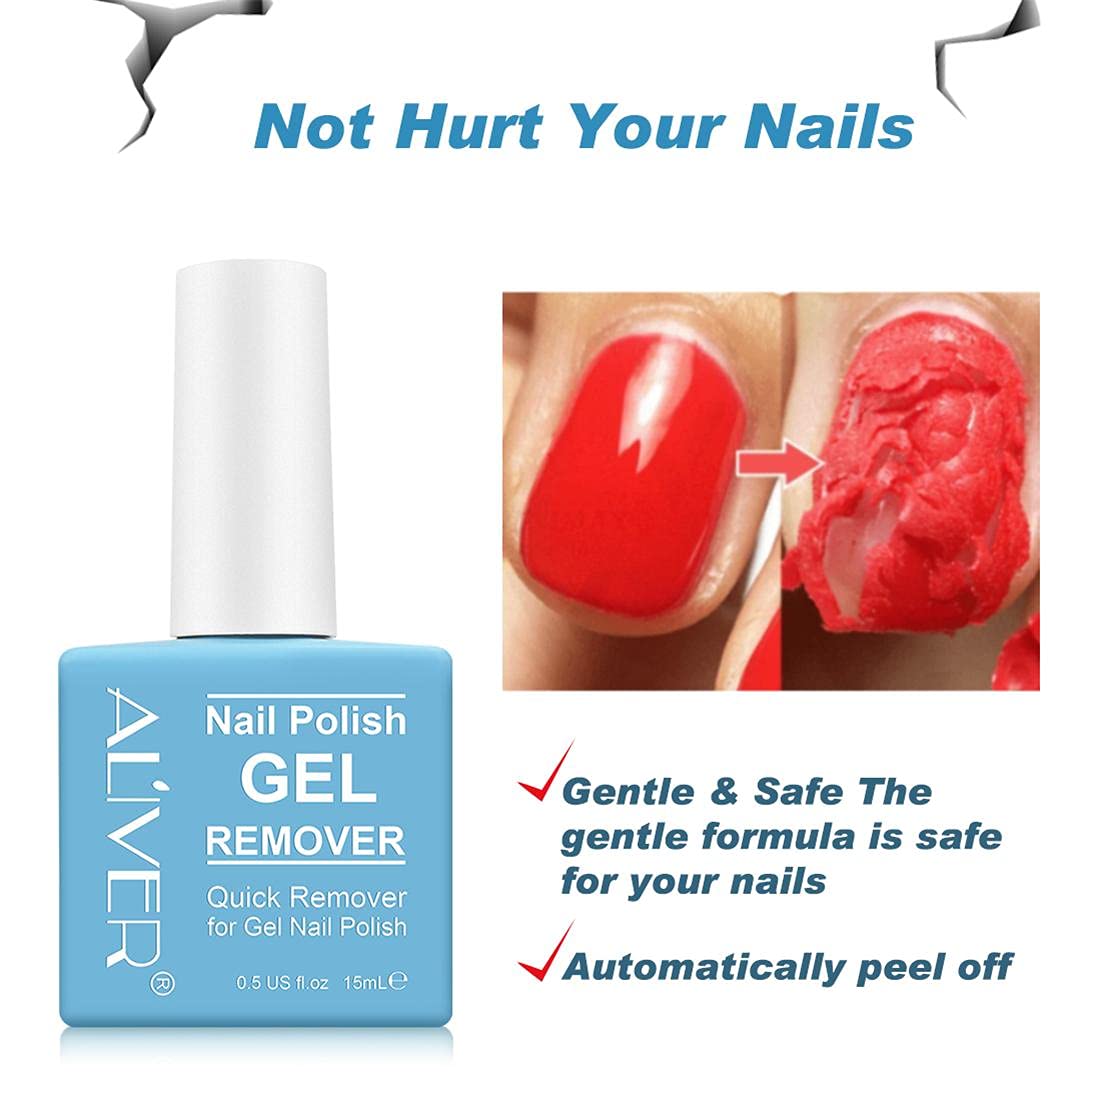 Gel Nail Polish Remover, Gel Remover for Nails, Quick Remove Gel Nail Polish, Professional Gel Nail Remover Remove Gel Polish in 3-5 Minutes Safely - HealthFulBeautyLife